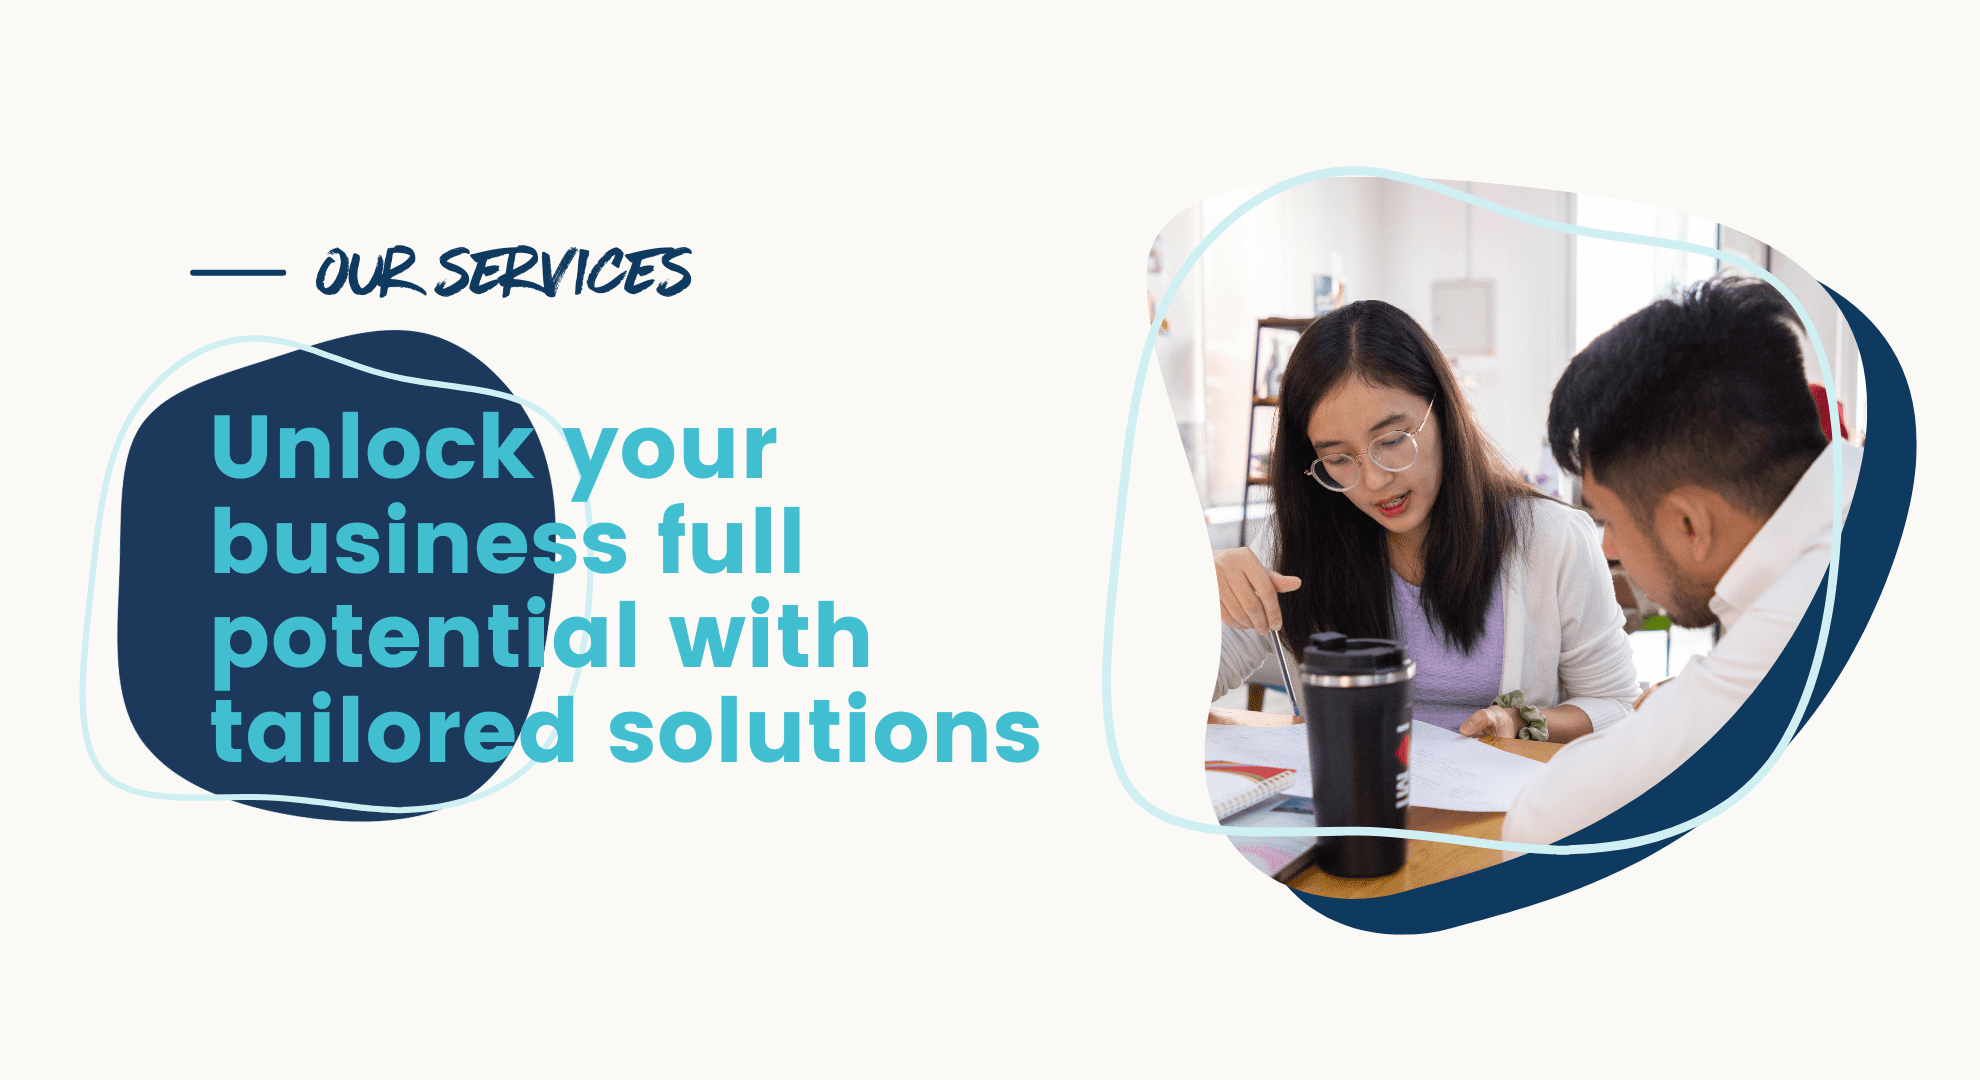 Our Services Unlock your business full potential with tailored solutions